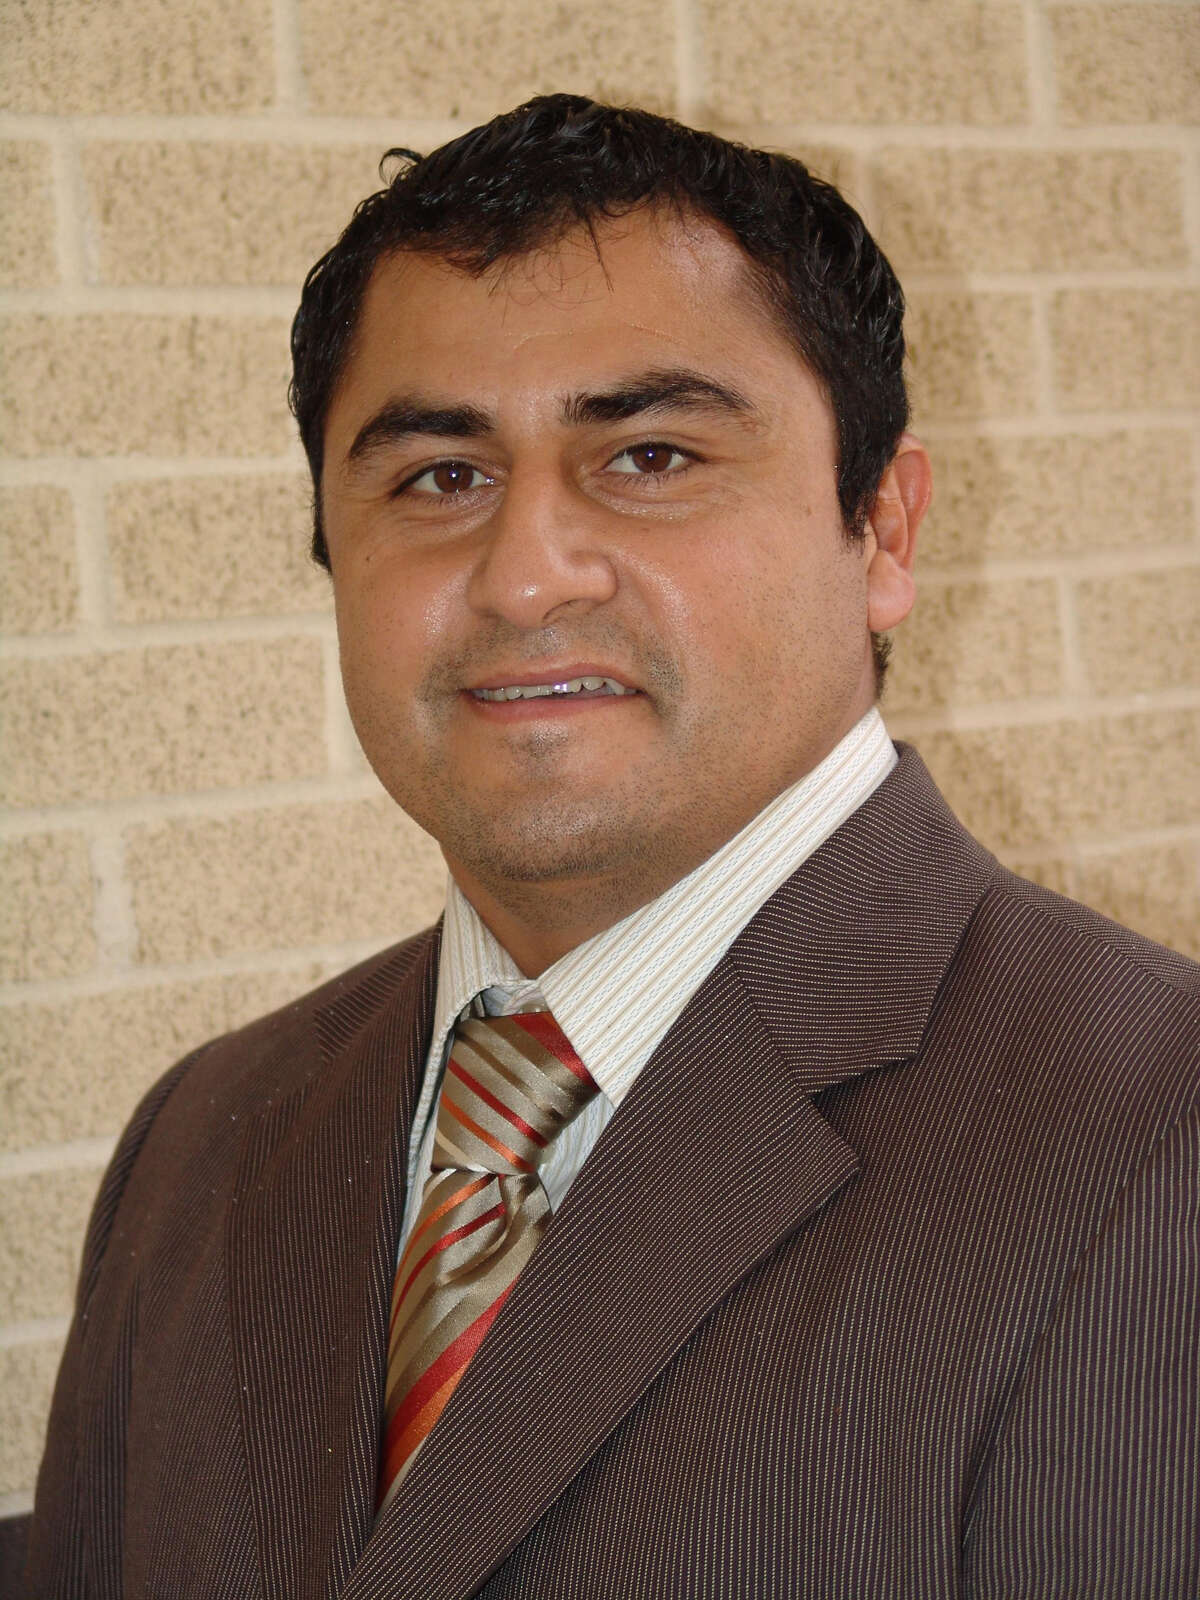 VOTERS GUIDE 2008 Ramiro Nava, candidate for Edgewood ISD board seat place 5